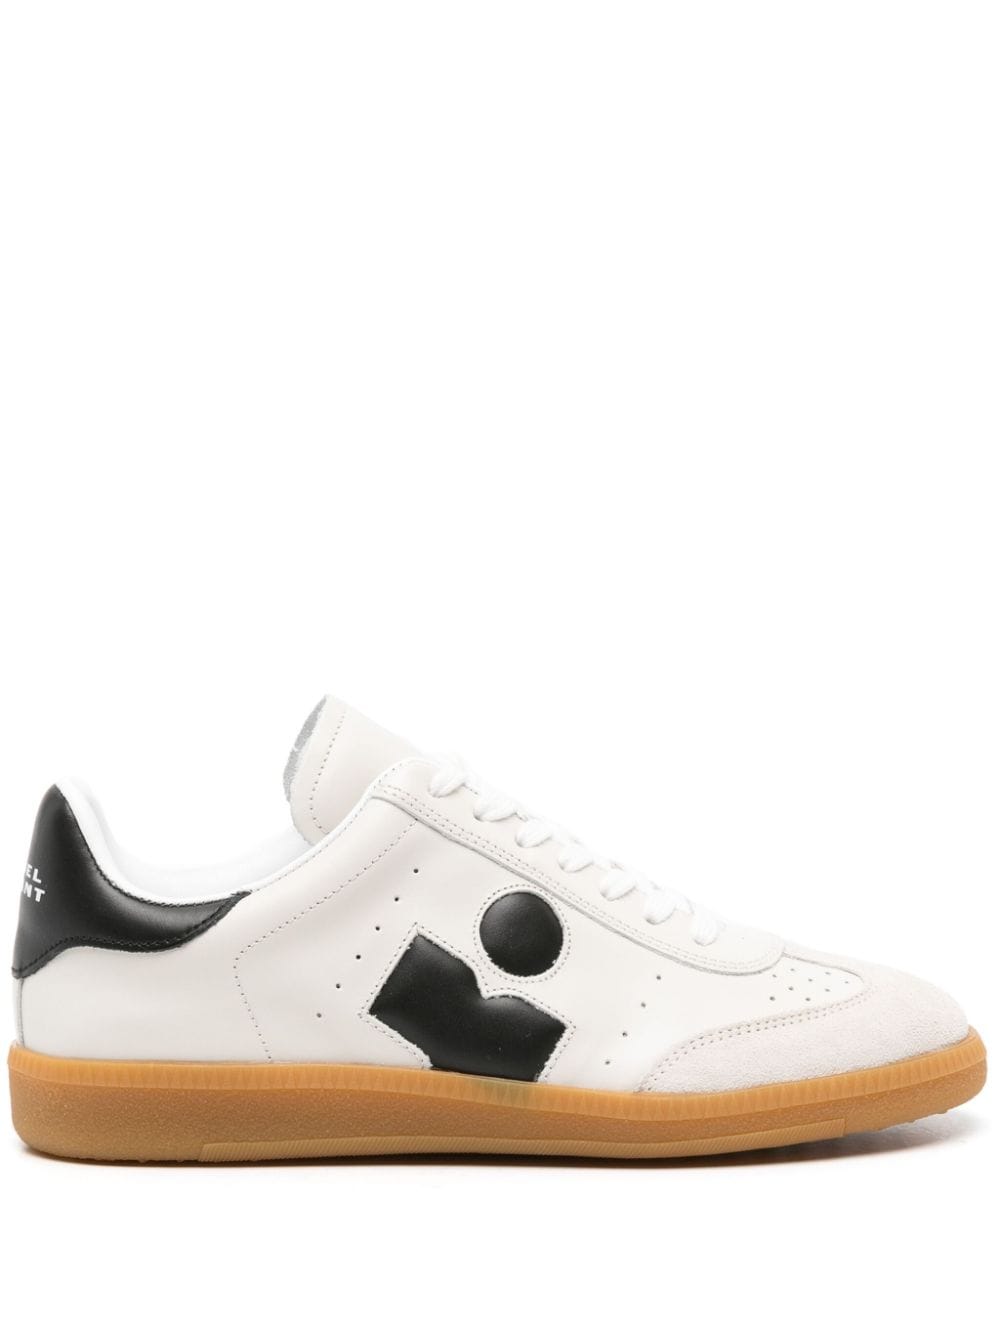 Isabel Marant ISABEL MARANT- Bryce Leather Sneakers